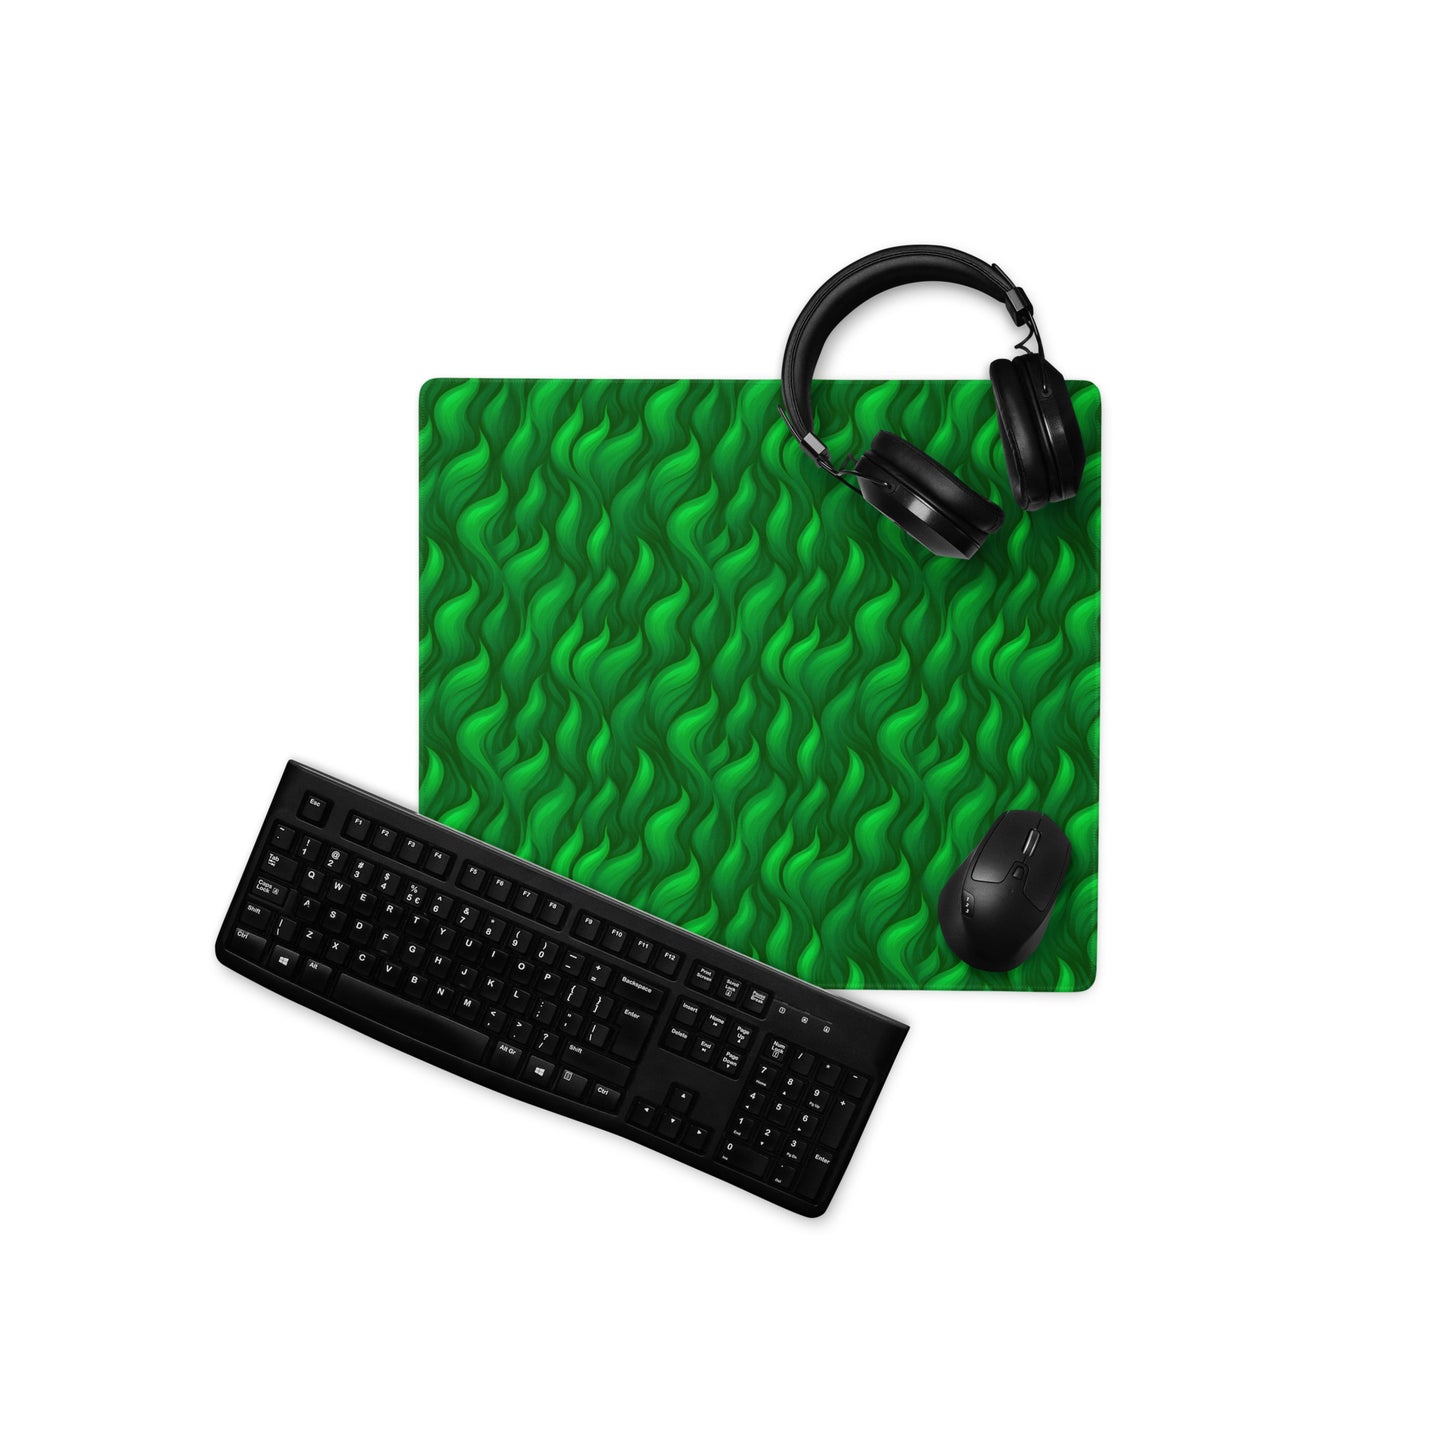 A 18" x 16" desk pad with a wavy flame pattern on it shown with a keyboard, headphones and a mouse. Green in color.